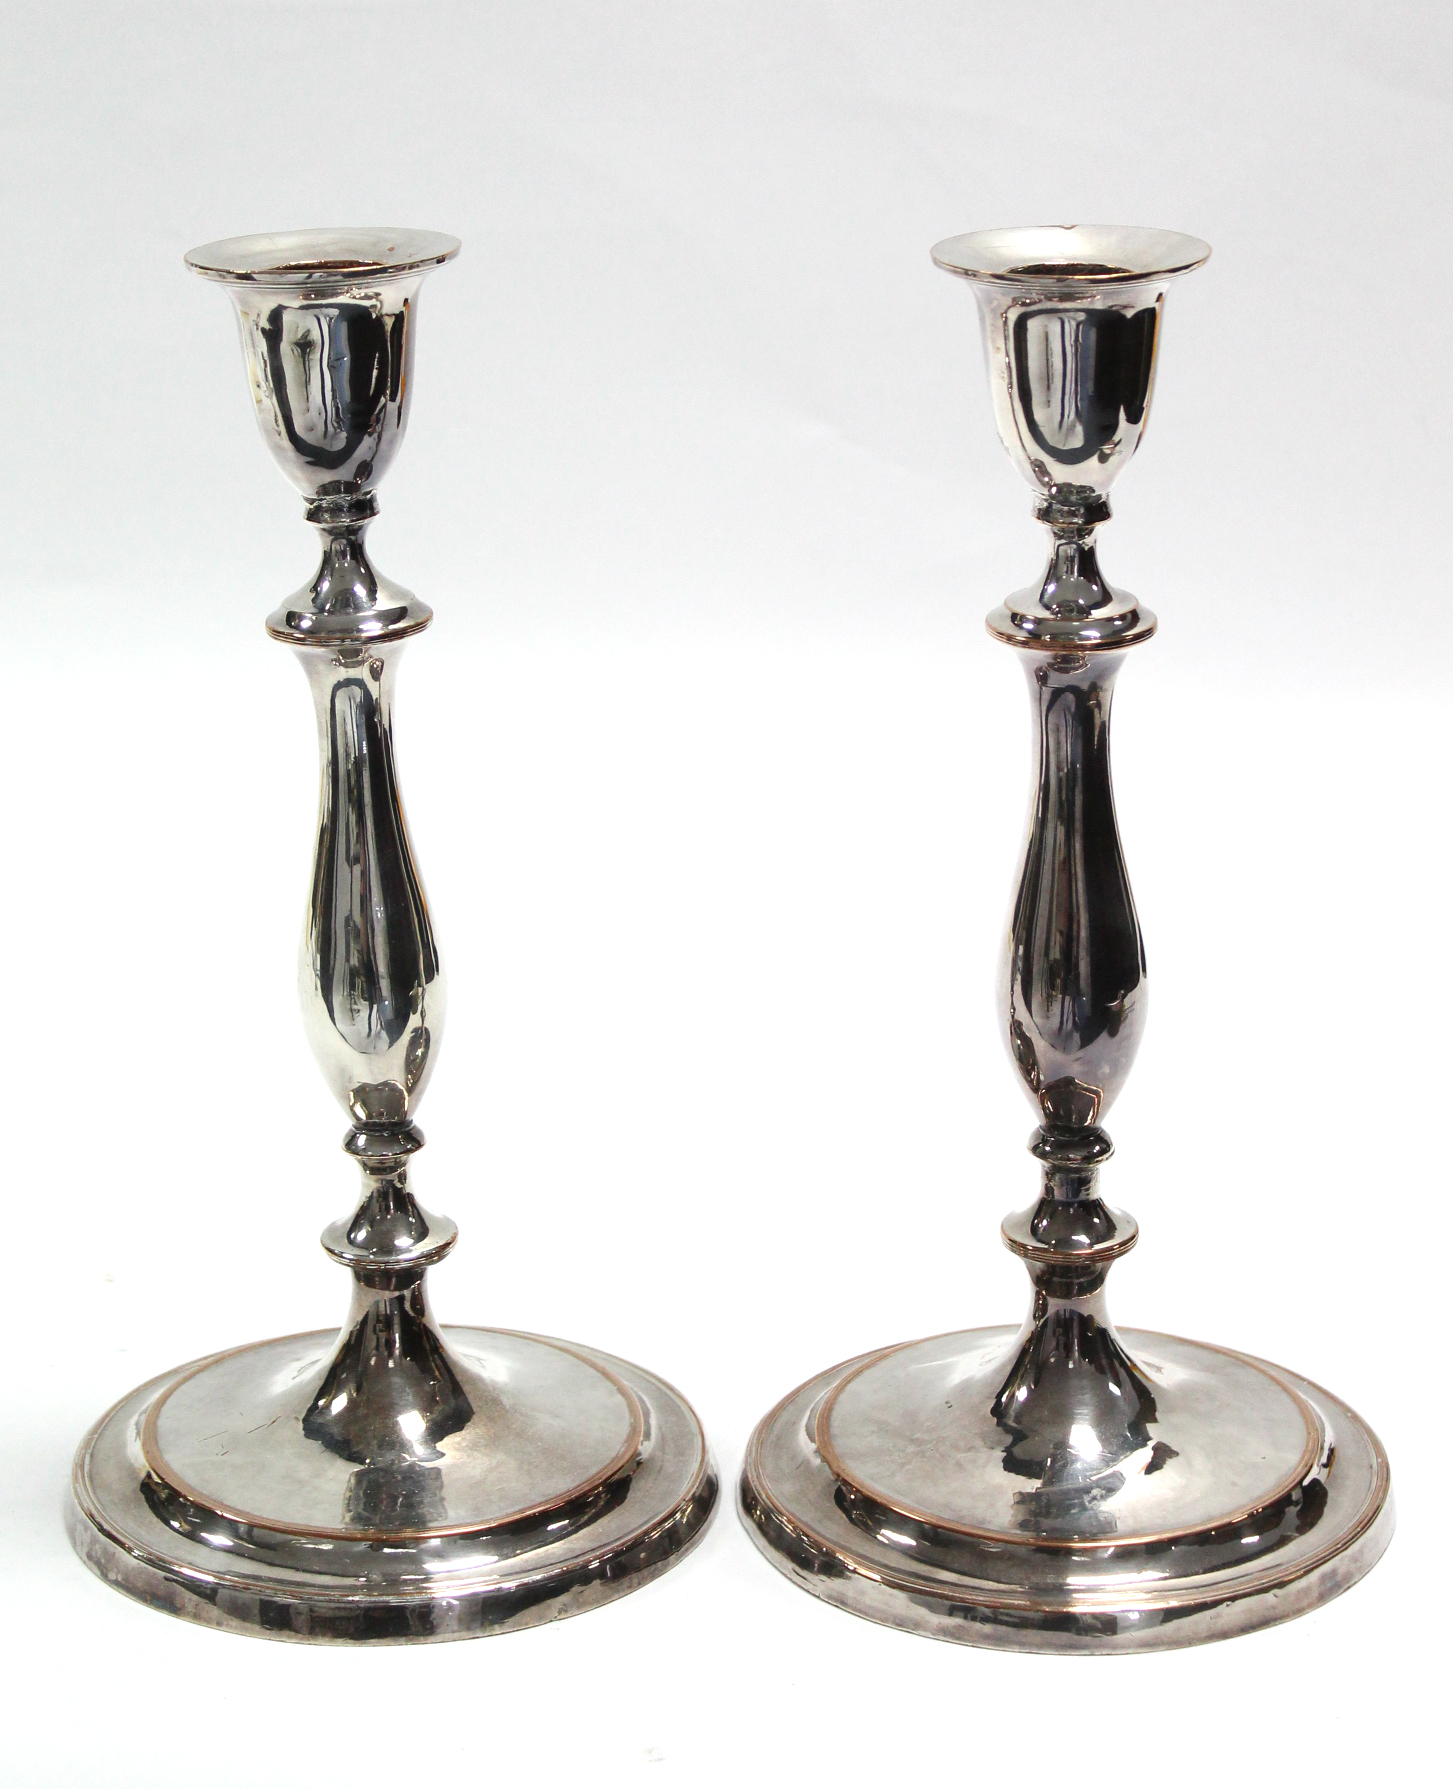 A pair of late 18th century Sheffield candlesticks with vase-shaped nozzles, slender baluster